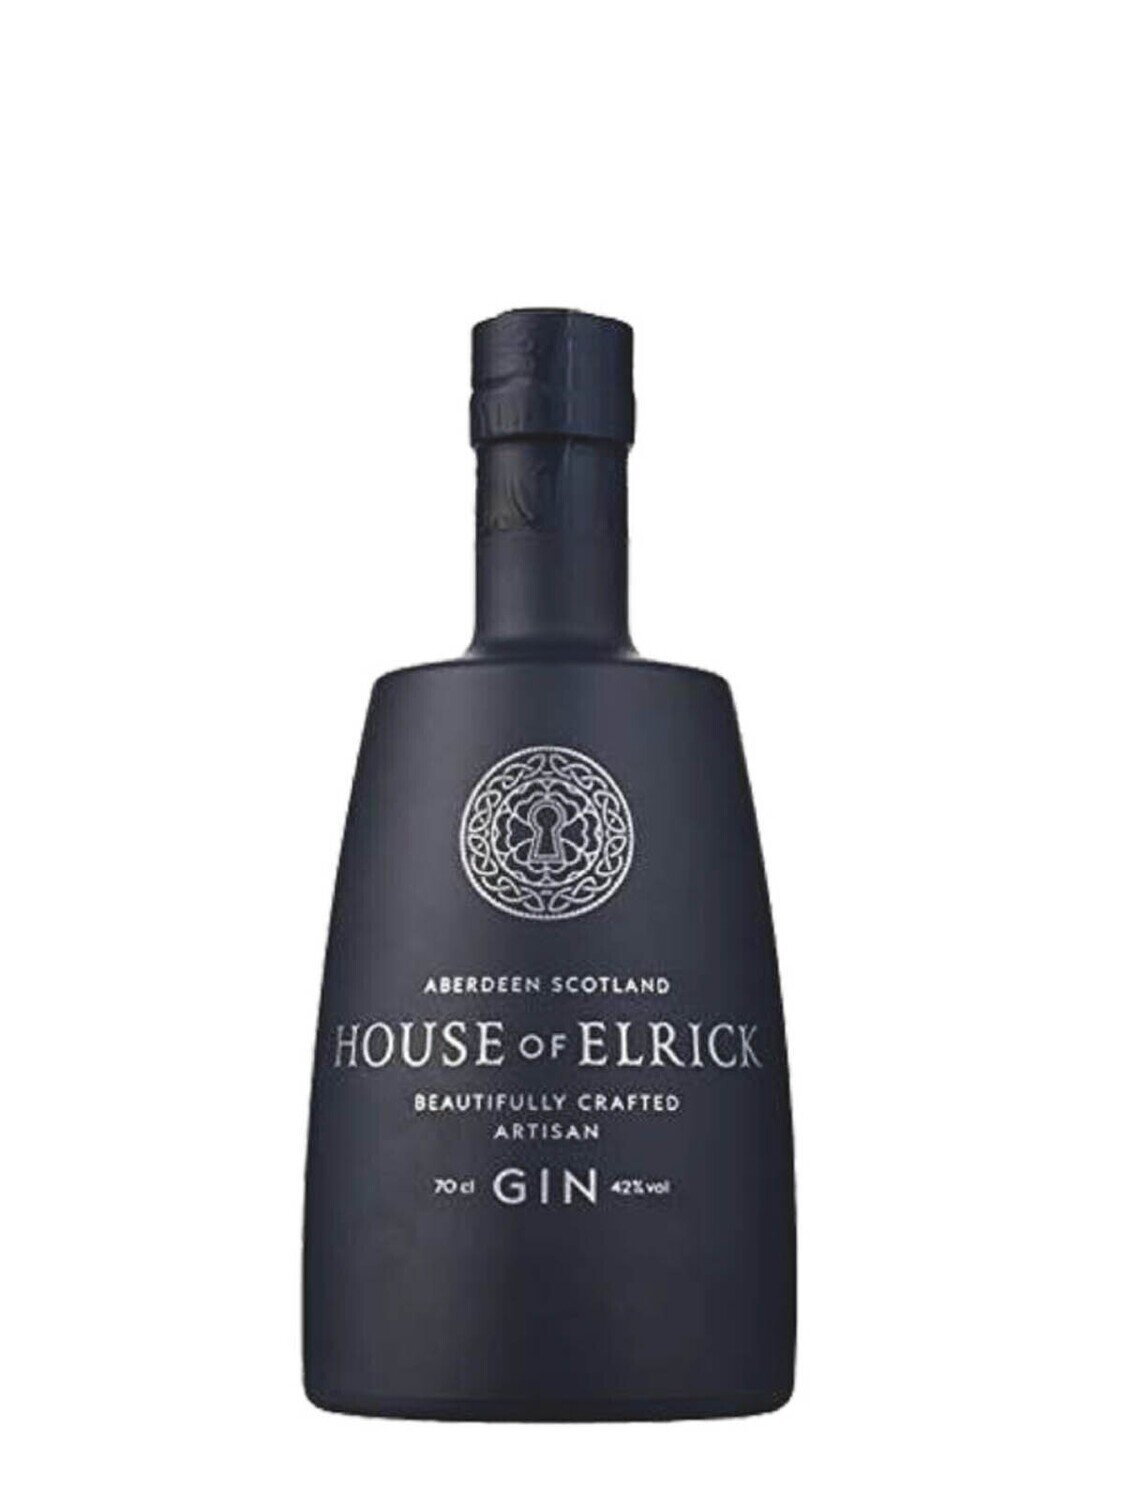 House Of Elrick Gin 42% ABV 750mL